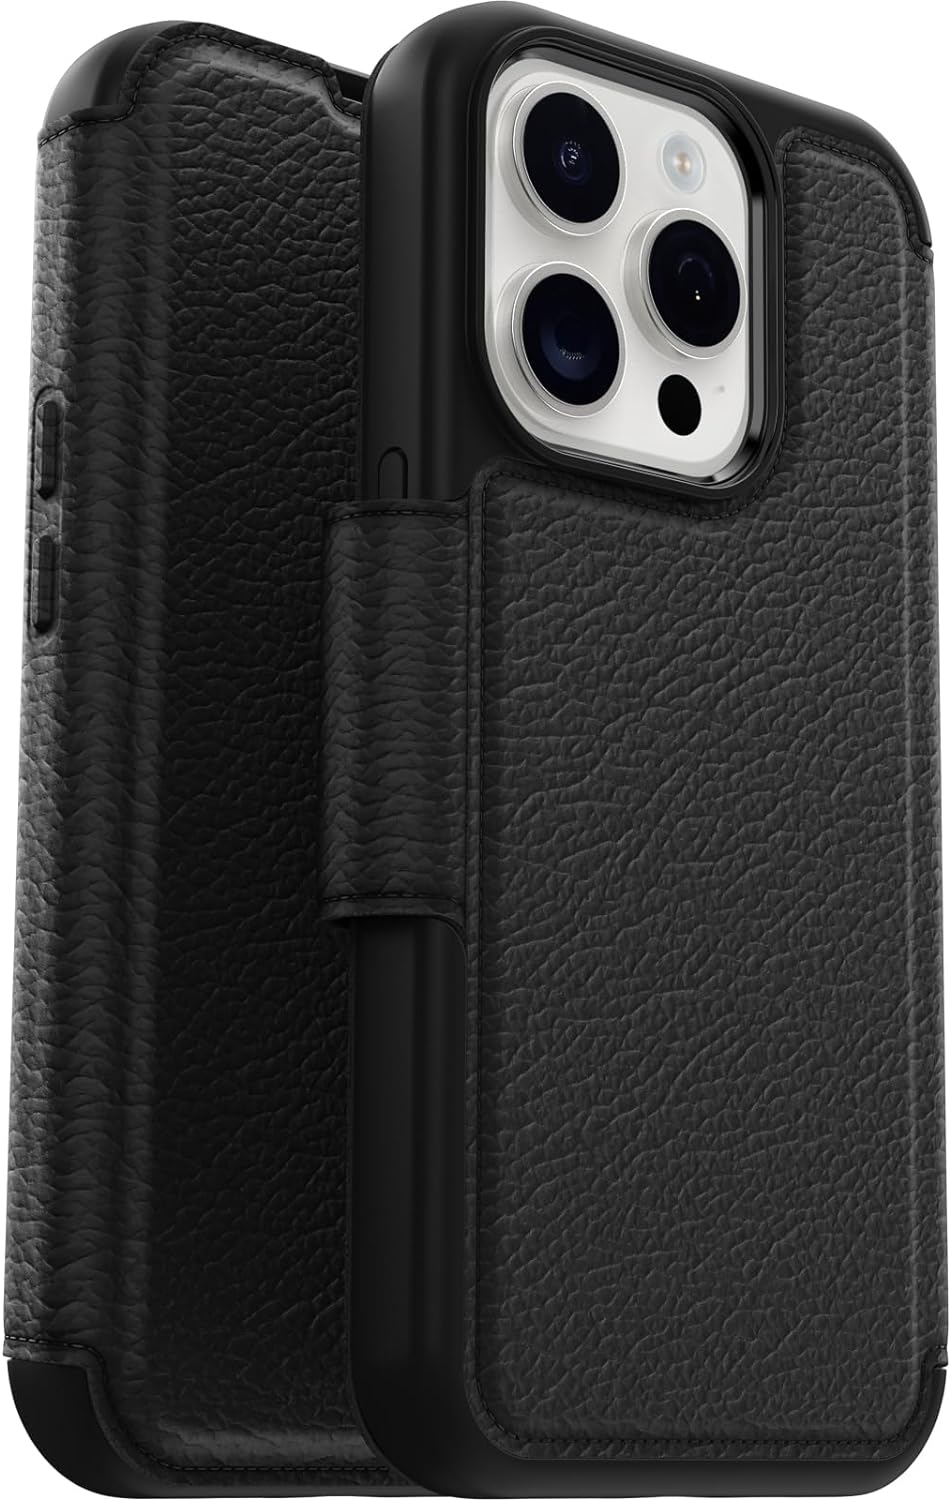 OtterBox Case for iPhone 12 / 12 Pro Strada Series Case